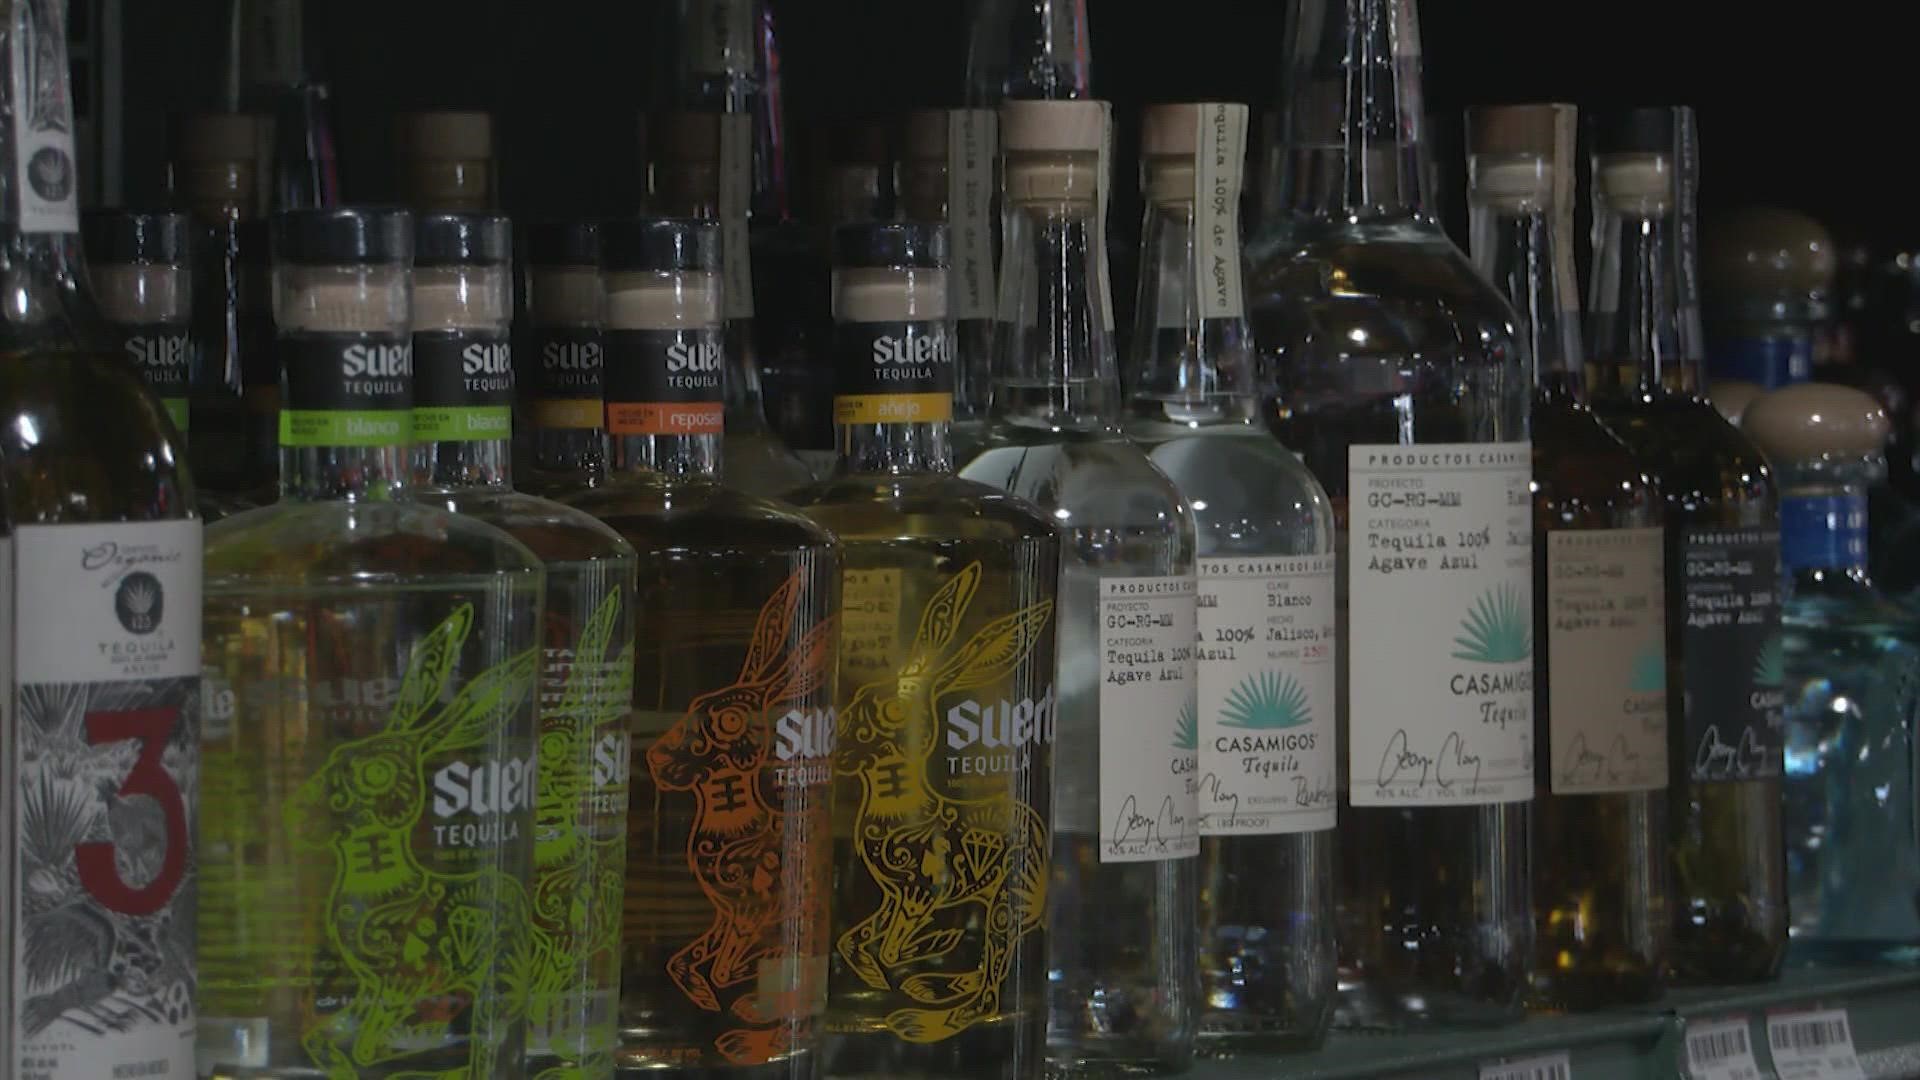 If you're ringing in the New Year with a toast, it may take some extra planning this year, because Texas liquor stores will be closed for 61 hours this weekend.